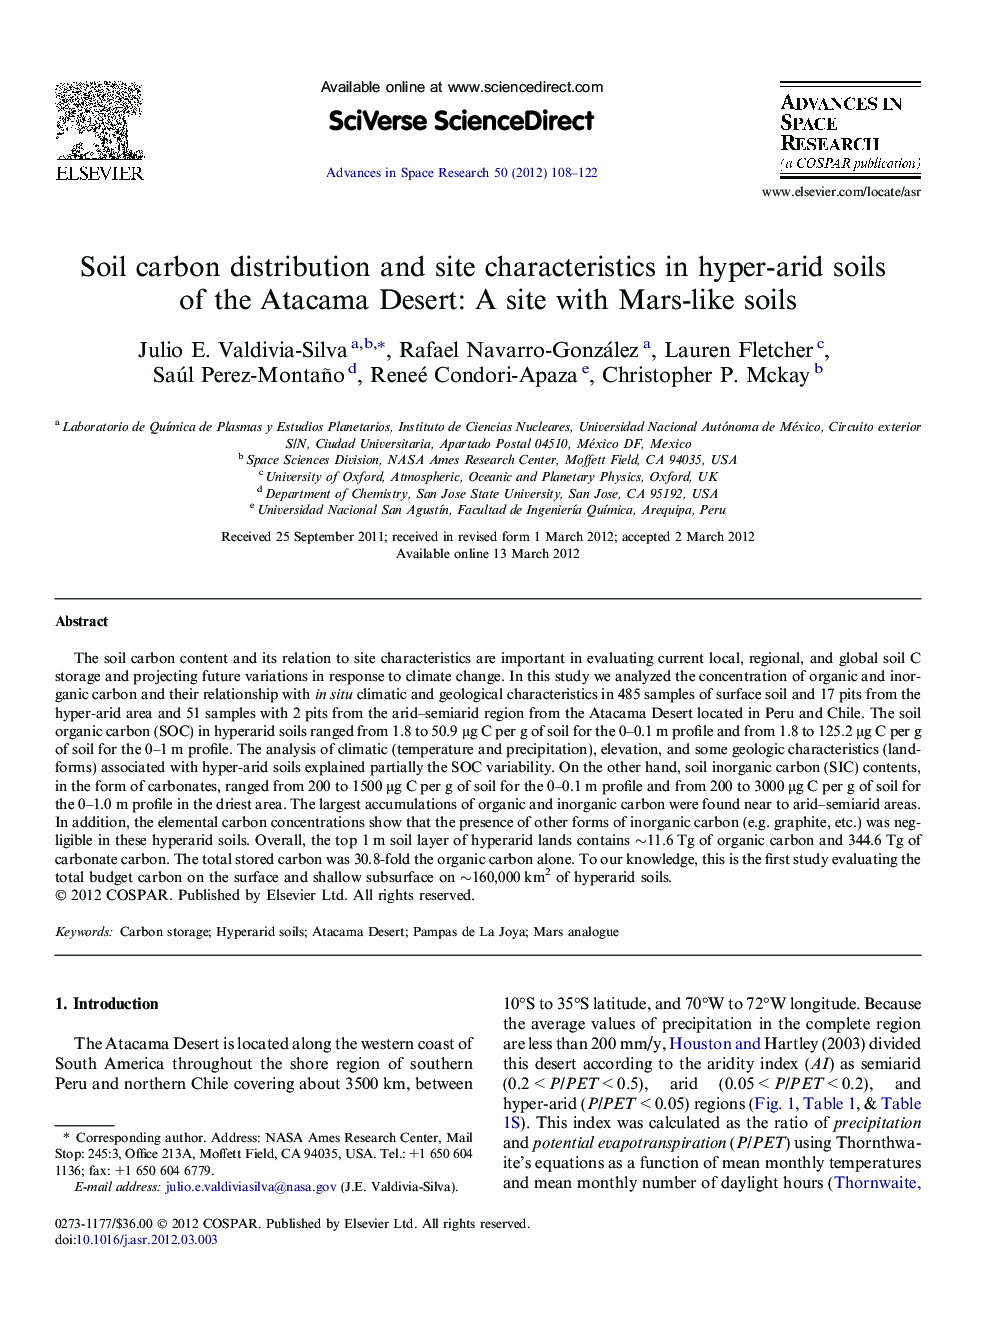 Soil carbon distribution and site characteristics in hyper-arid soils of the Atacama Desert: A site with Mars-like soils